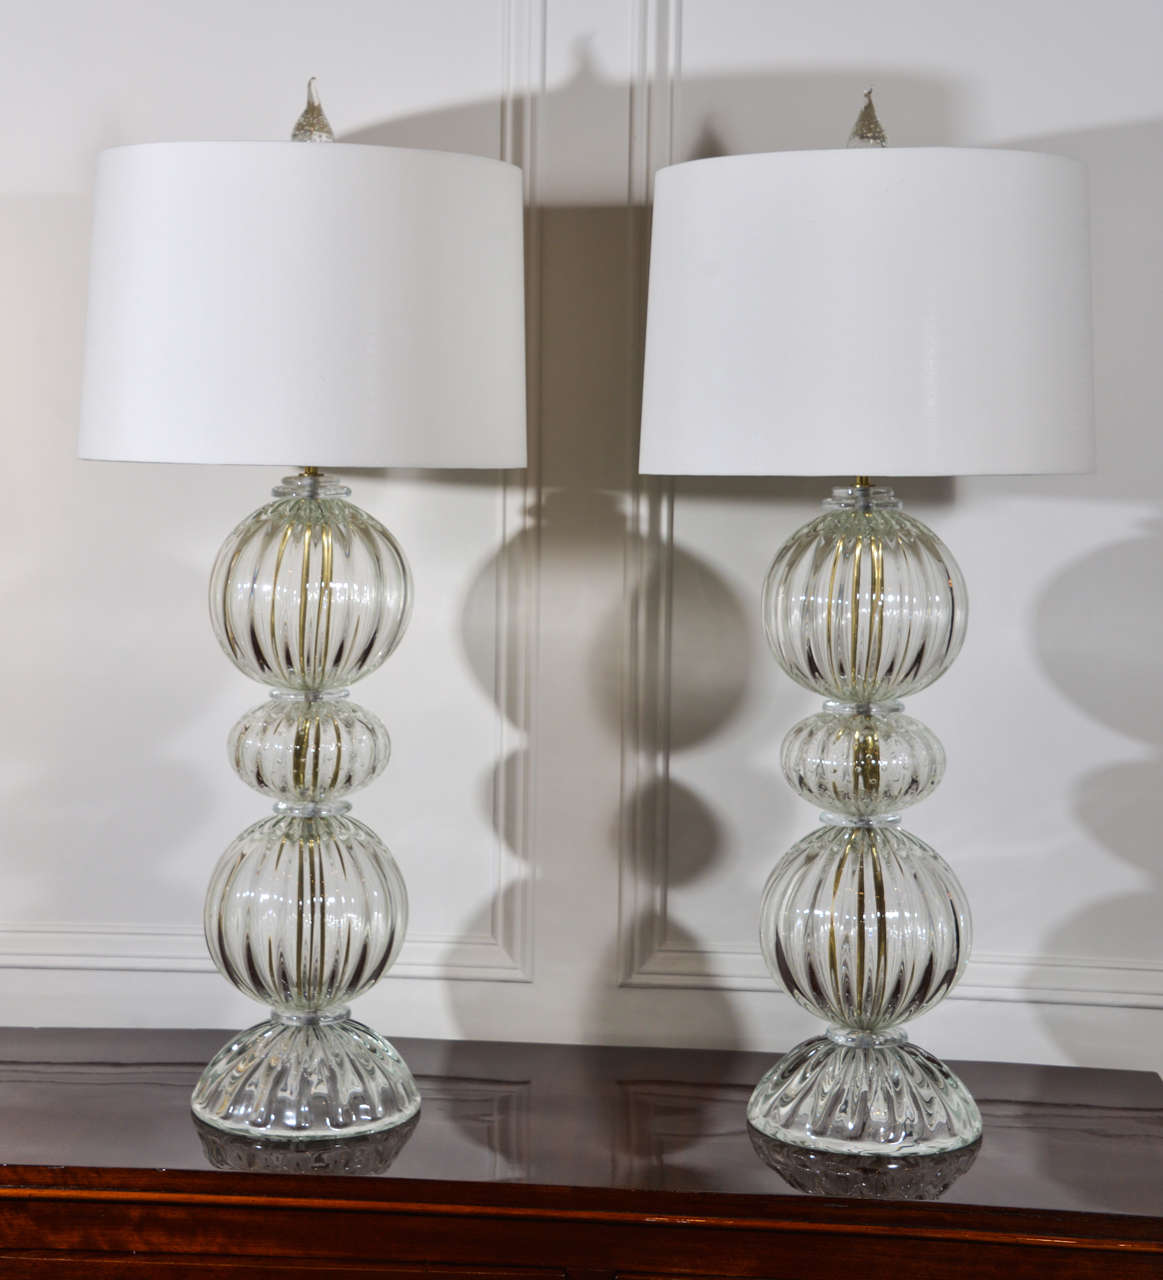 A pair of handblown clear Murano glass lamps by Barovier, circa 1950s.

The base and center orb feature controlled bubbles within the glass. Brass lamp hardware.